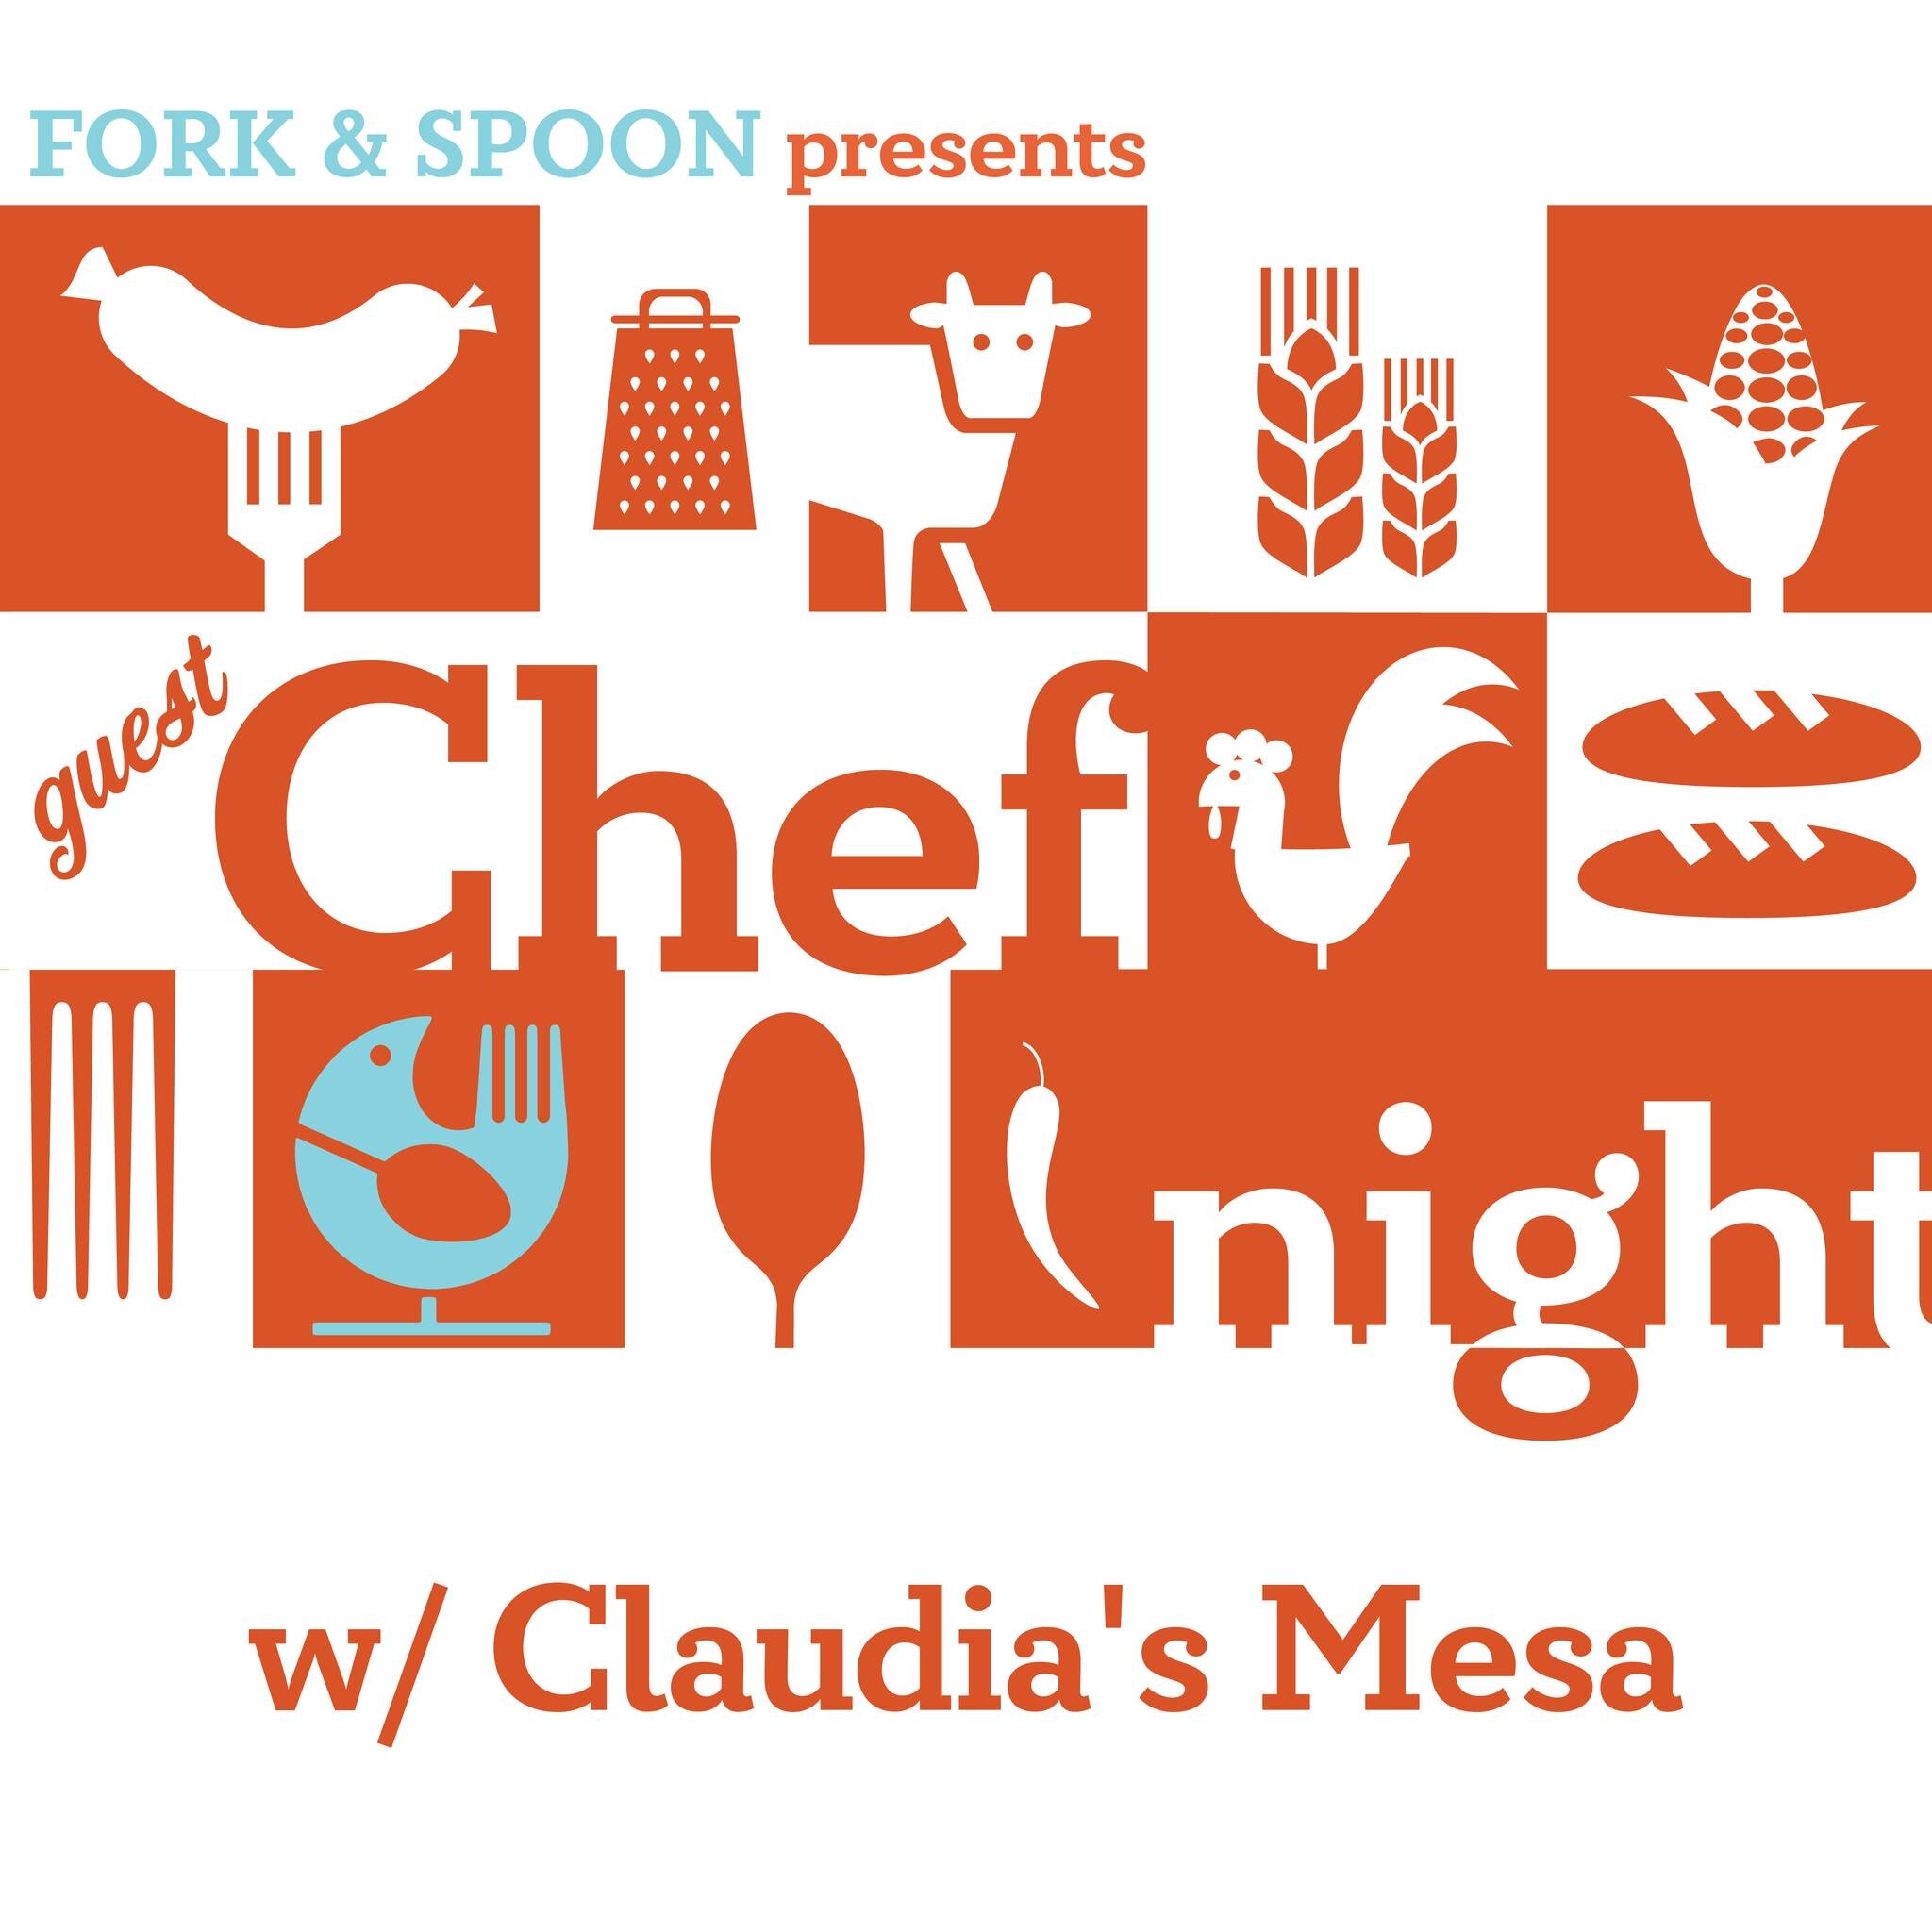 Don't miss Guest Chef Claudia Krevat's Latin American Fiesta being served at Fork &amp; Spoon on Tuesday, May 16, 4:30pm - 7:30pm.
Preorders still available until 11:55am Tuesday! 
https://fork-spoon-pre-orders.square.site
 #lentilqueen #bozemannonpr